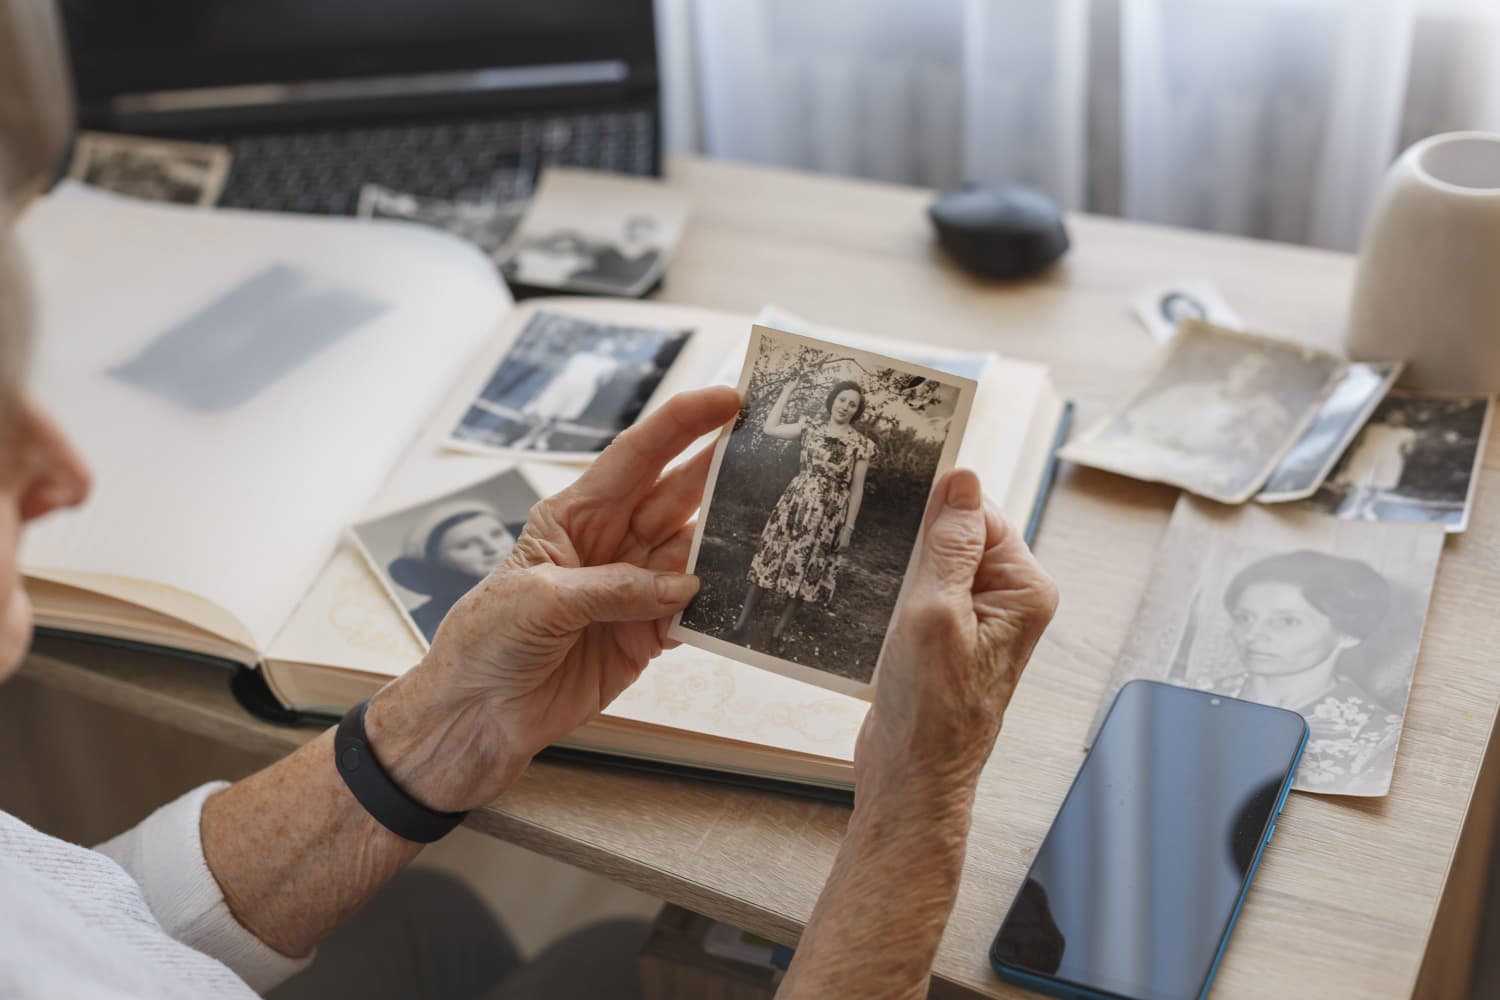 5 Ways to Digitize All of Those Beloved Old Photo Albums